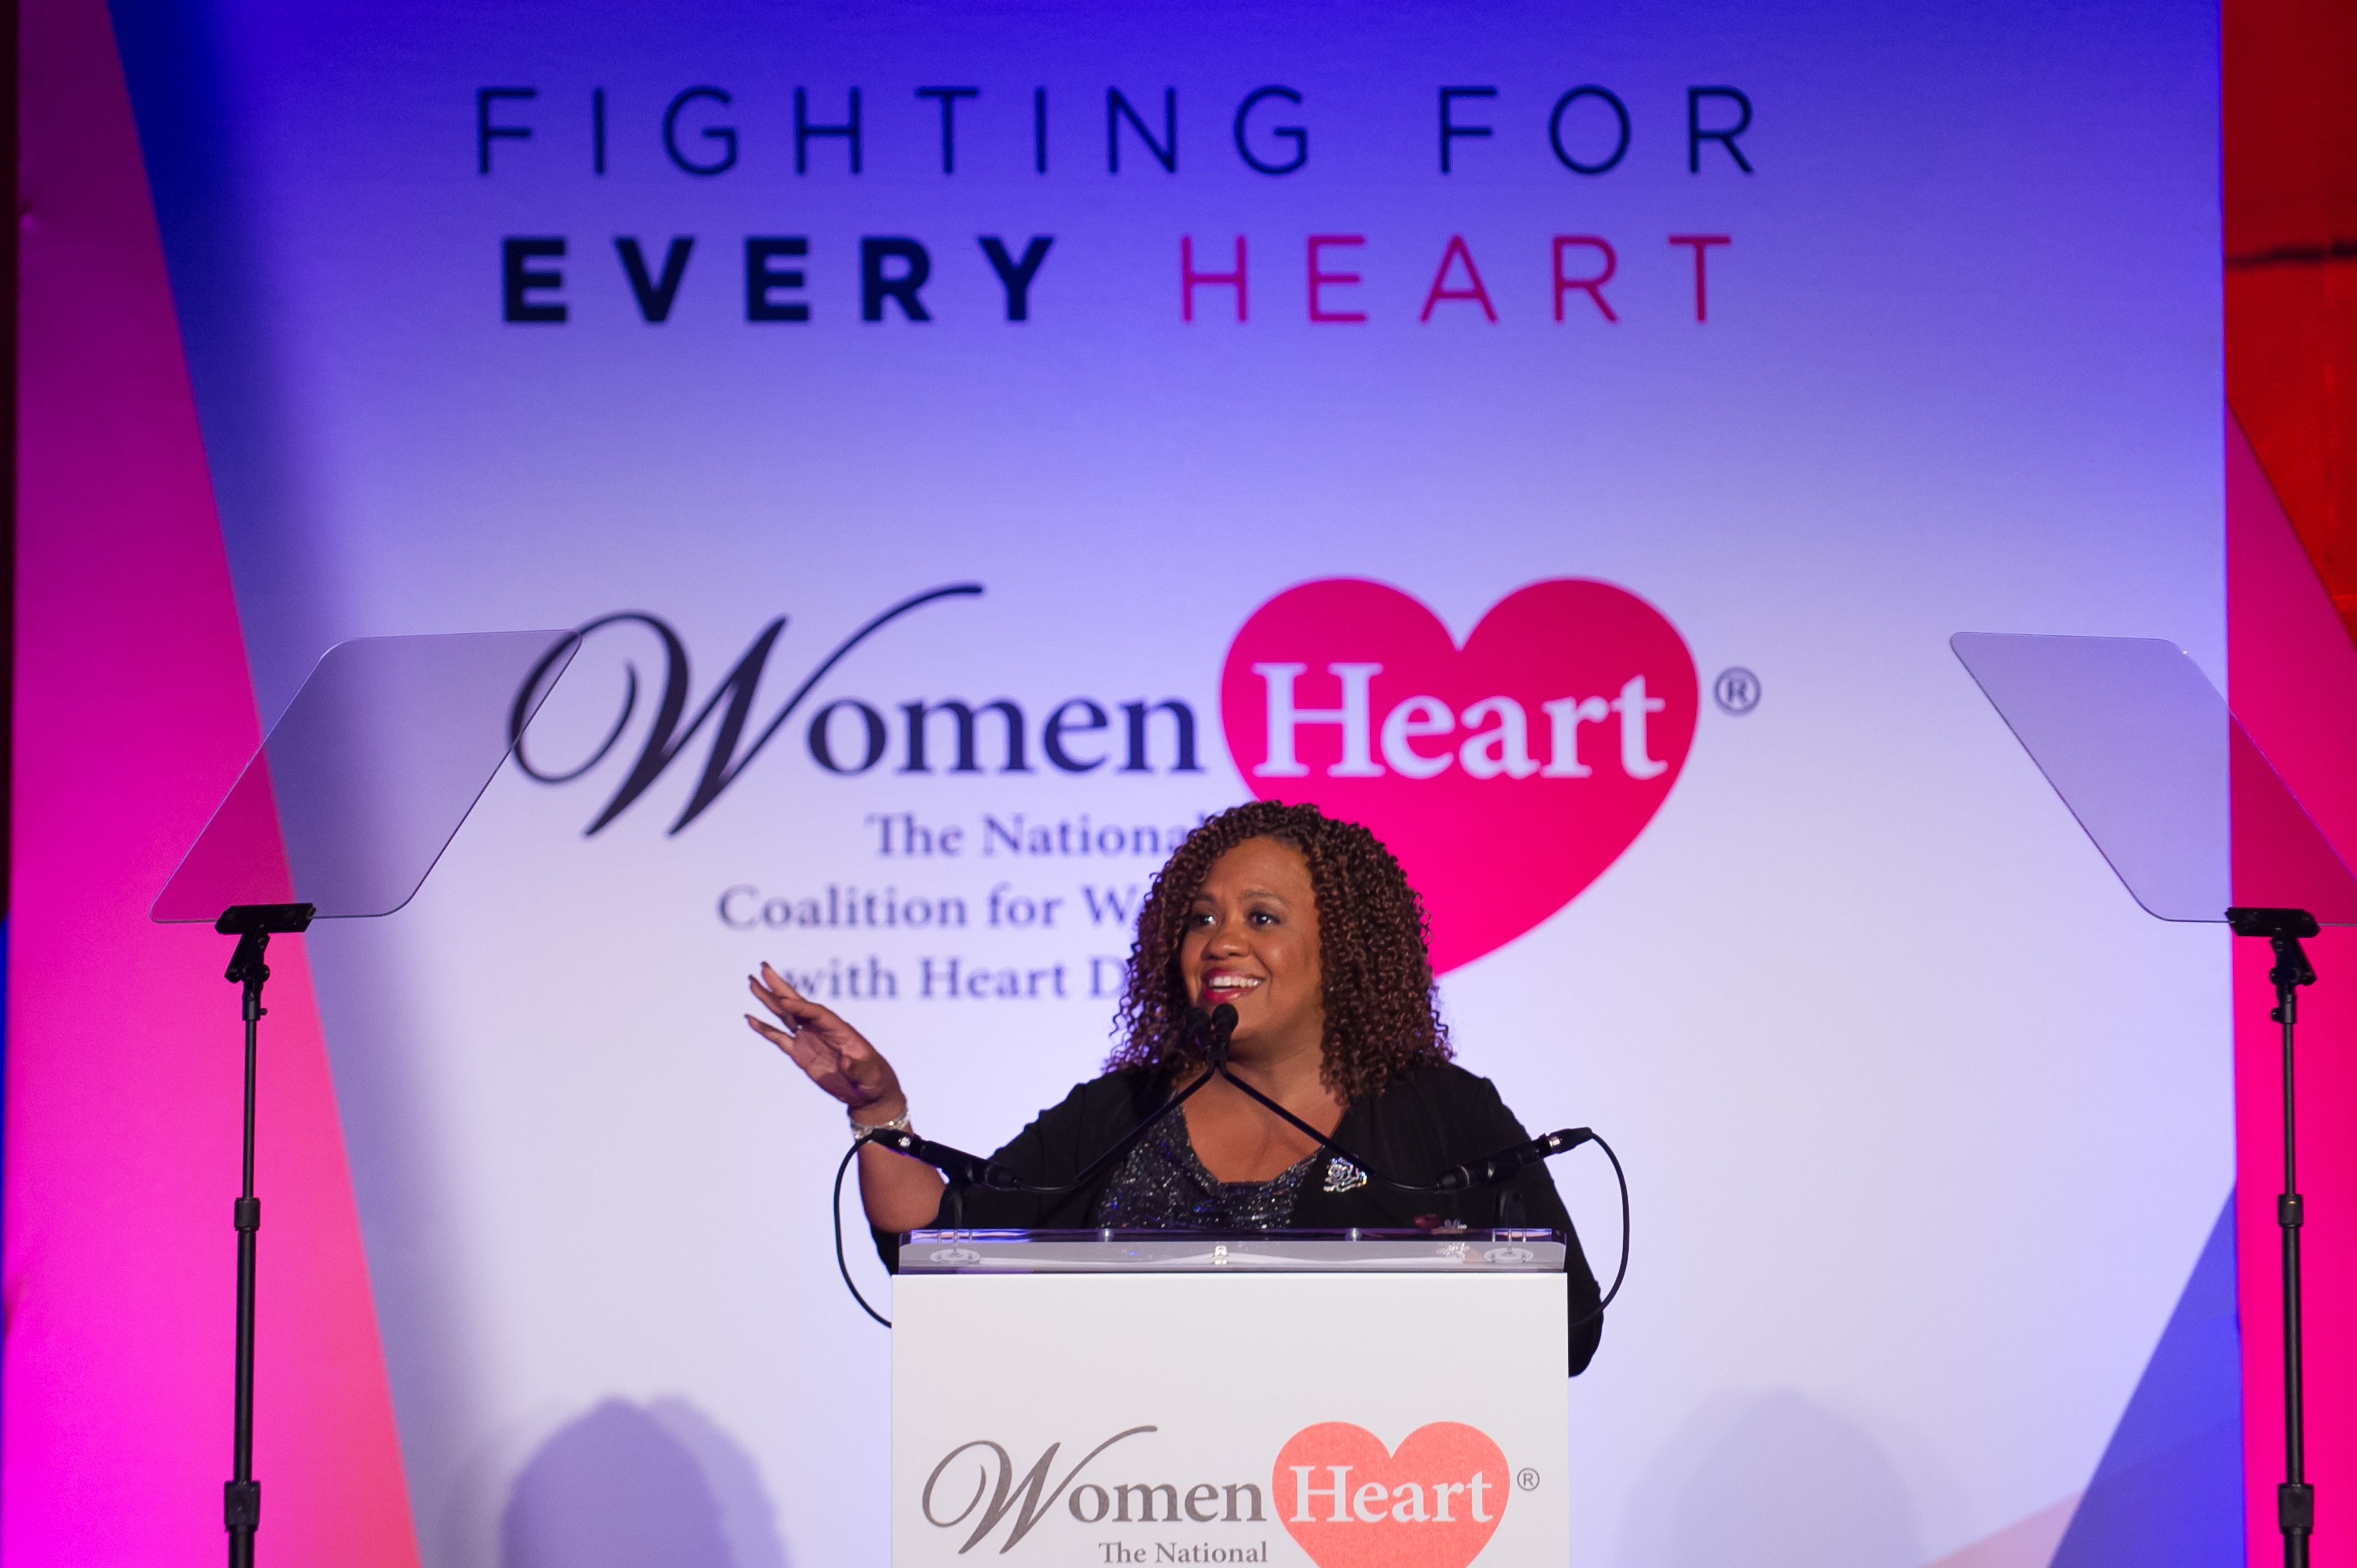 WomenHeart Team Recognized as Leaders in Heart Health and Research